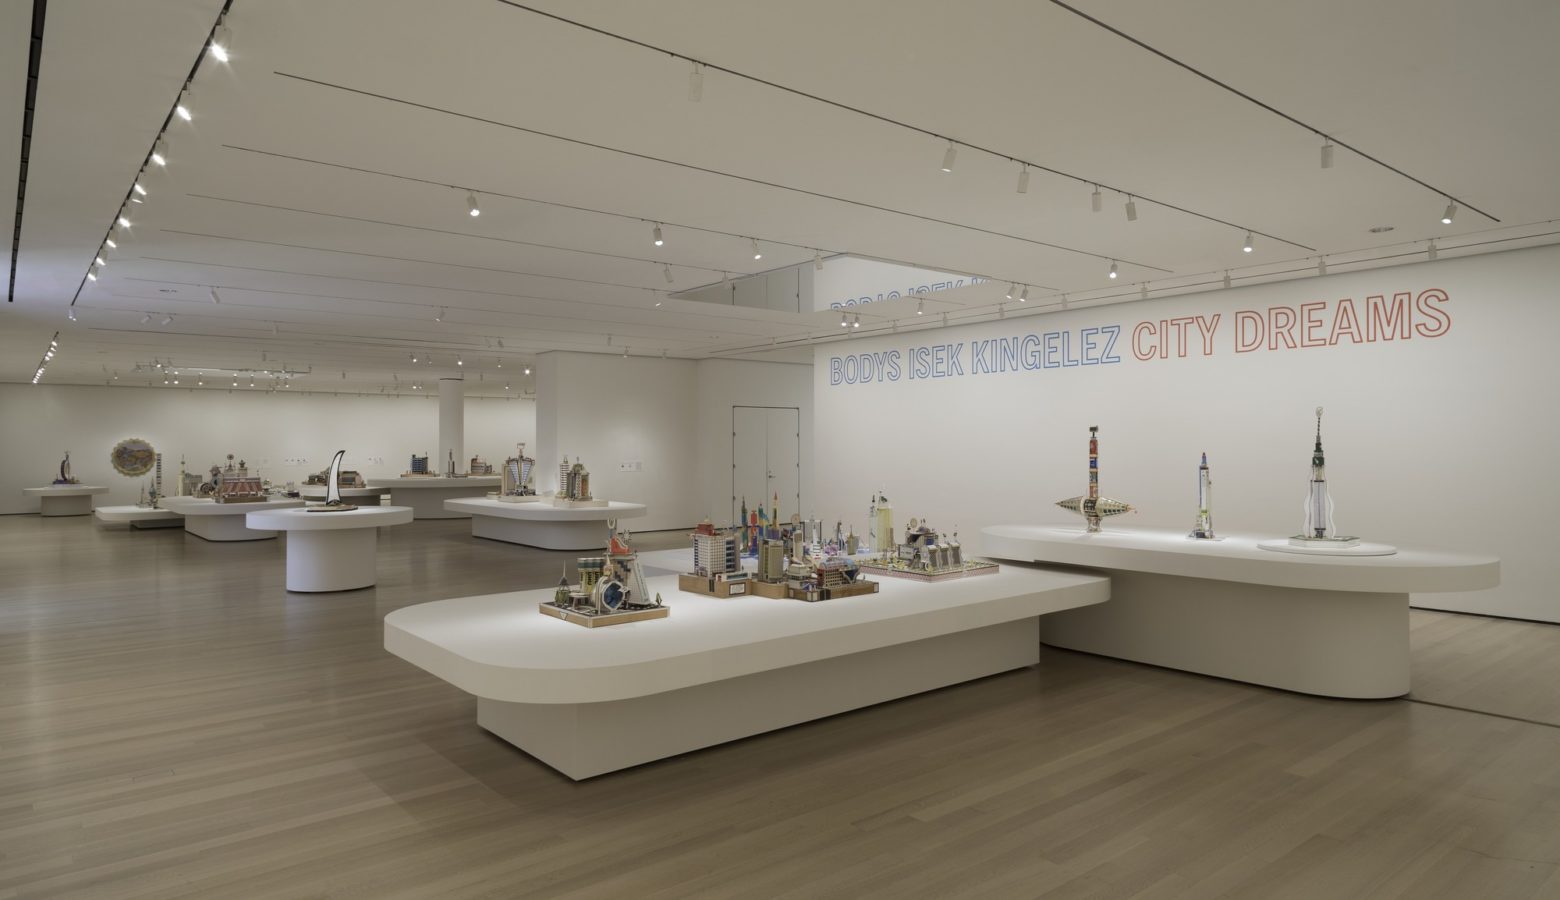 Installation view of the exhibition, "Bodys Isek Kingelez: City Dreams". Photograph by Denis Doorly, source: moma.org